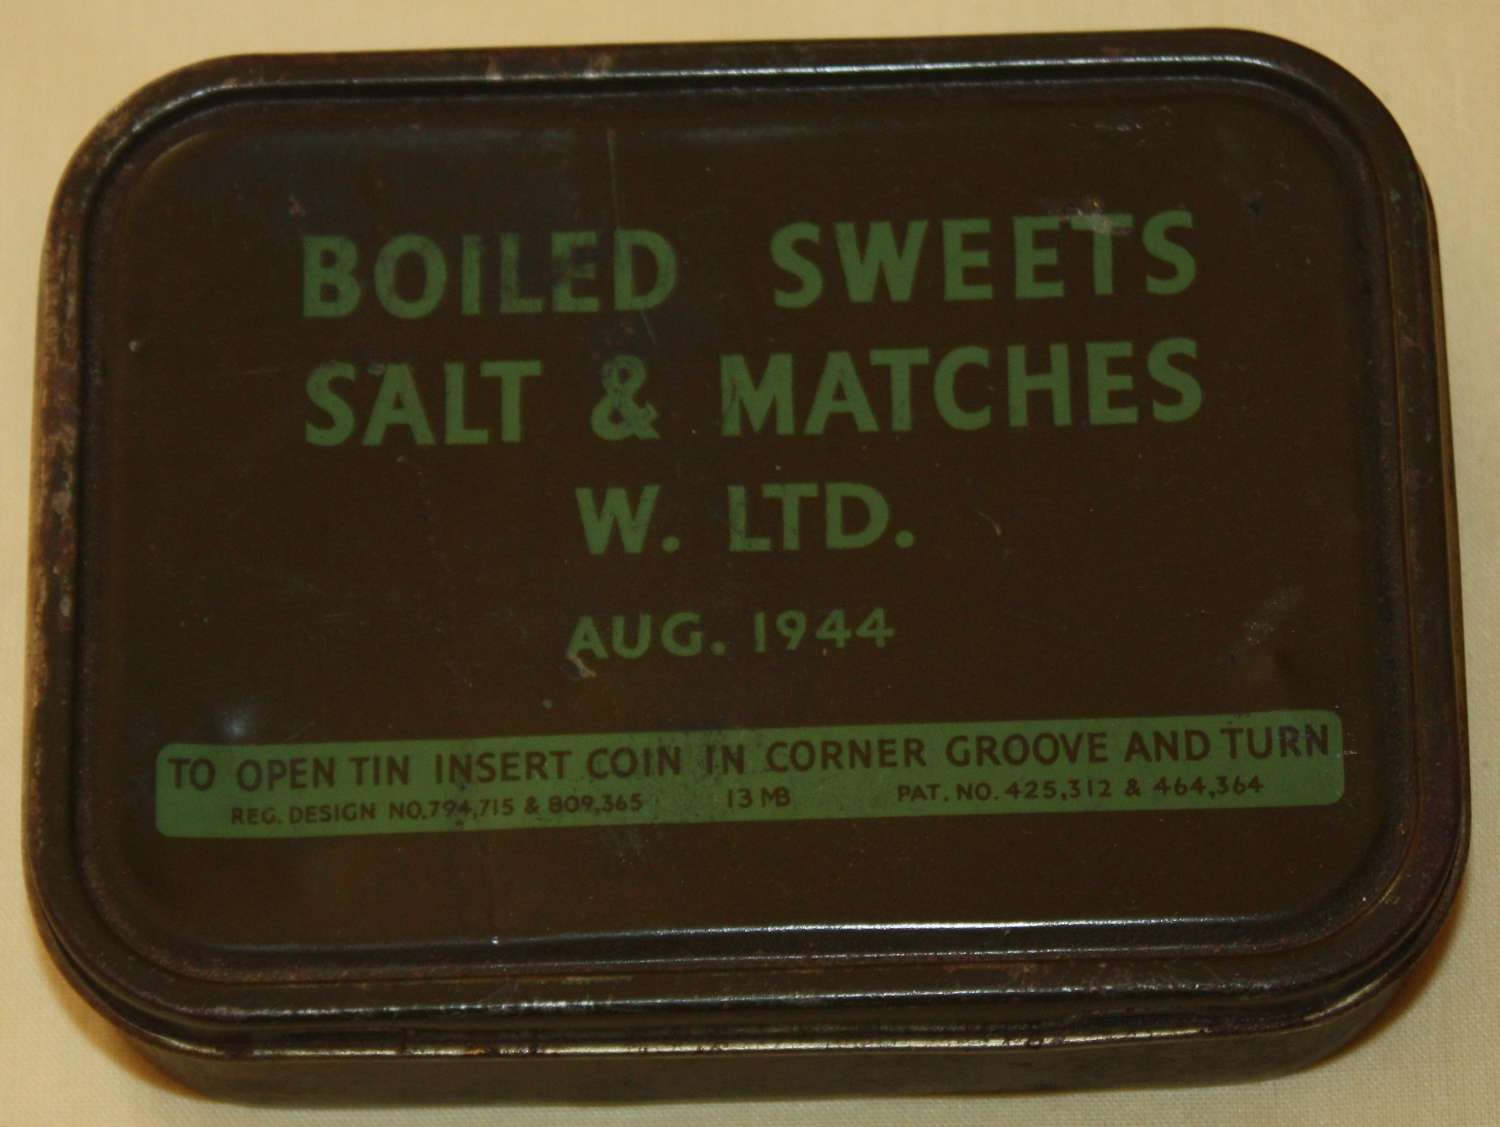 A RARE EXAMPLE OF THE BOILD SWEETS AND MATCHES RATION TIN